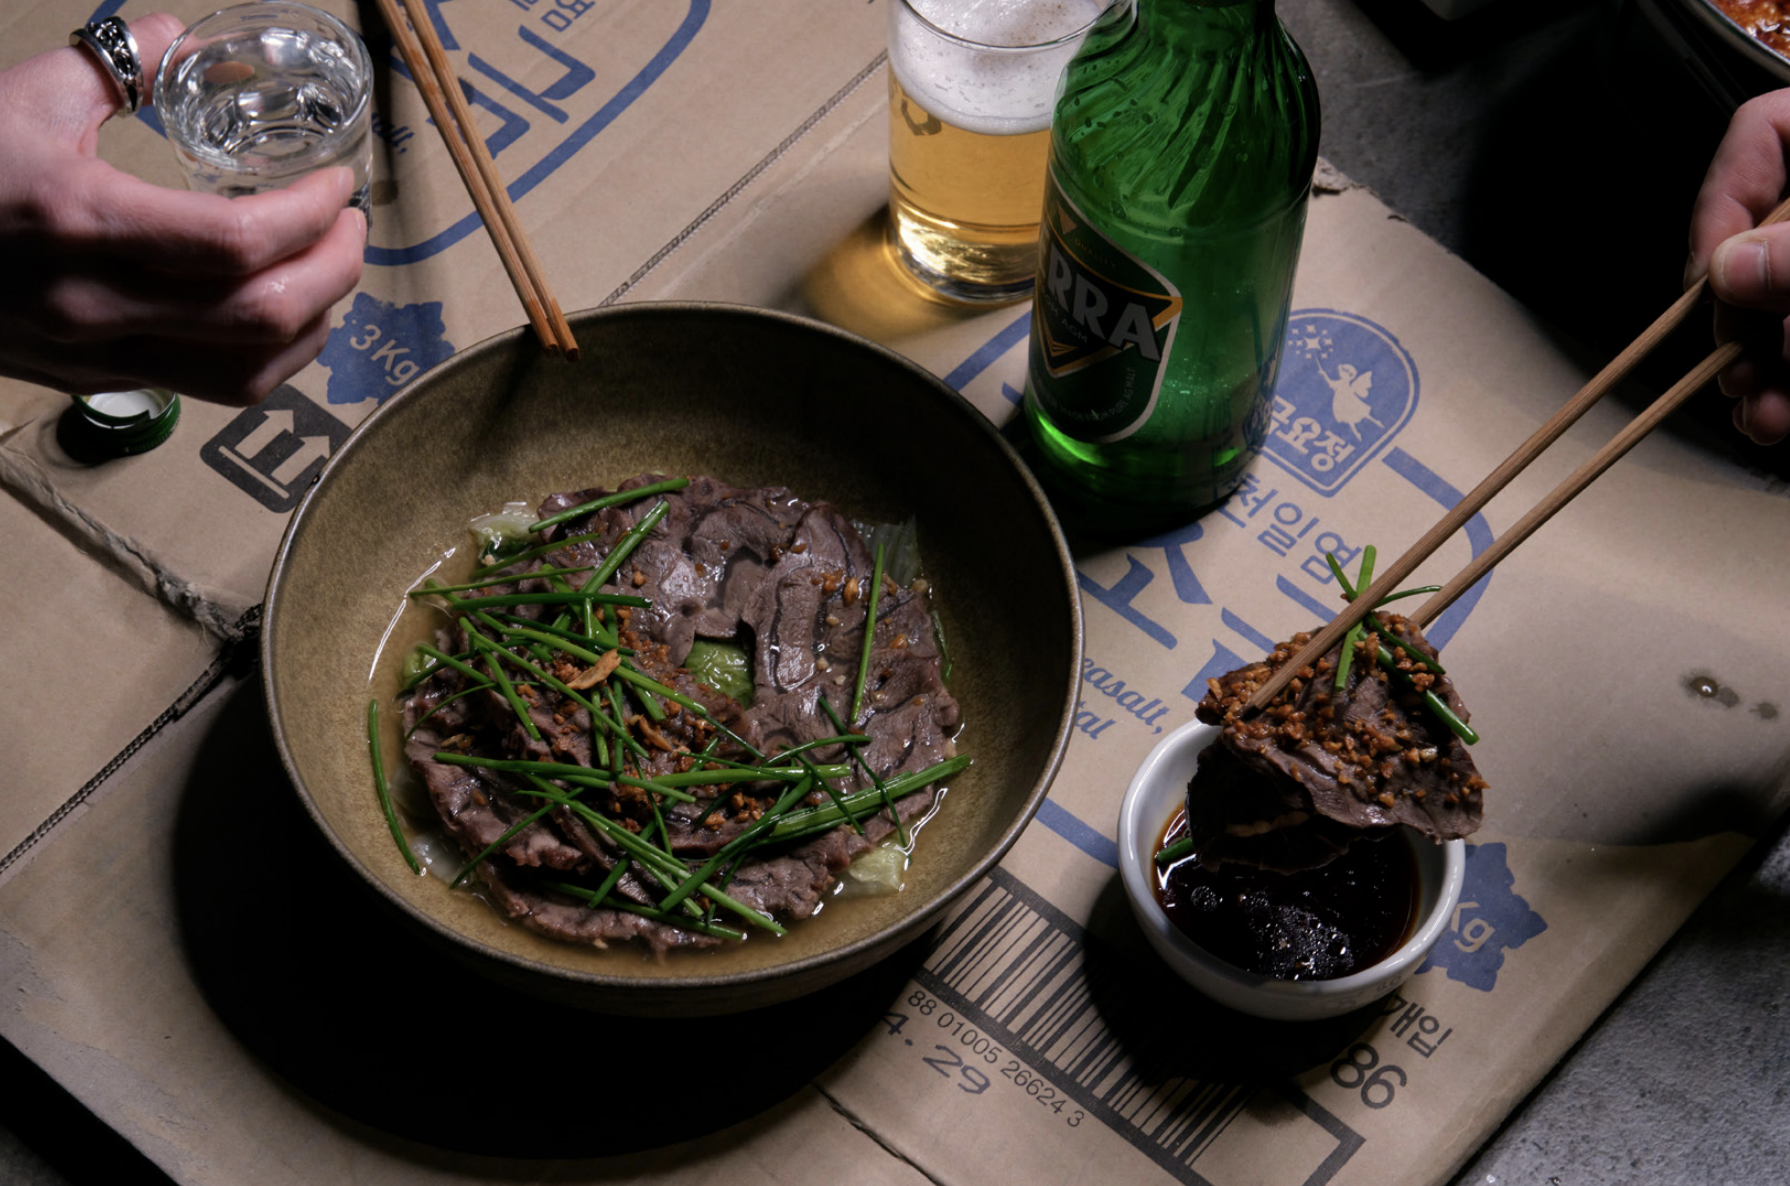 A hand holding chopsticks dunks a piece of cooked meat into a dipping sauce while another hand clutches a shot of clear alcohol.